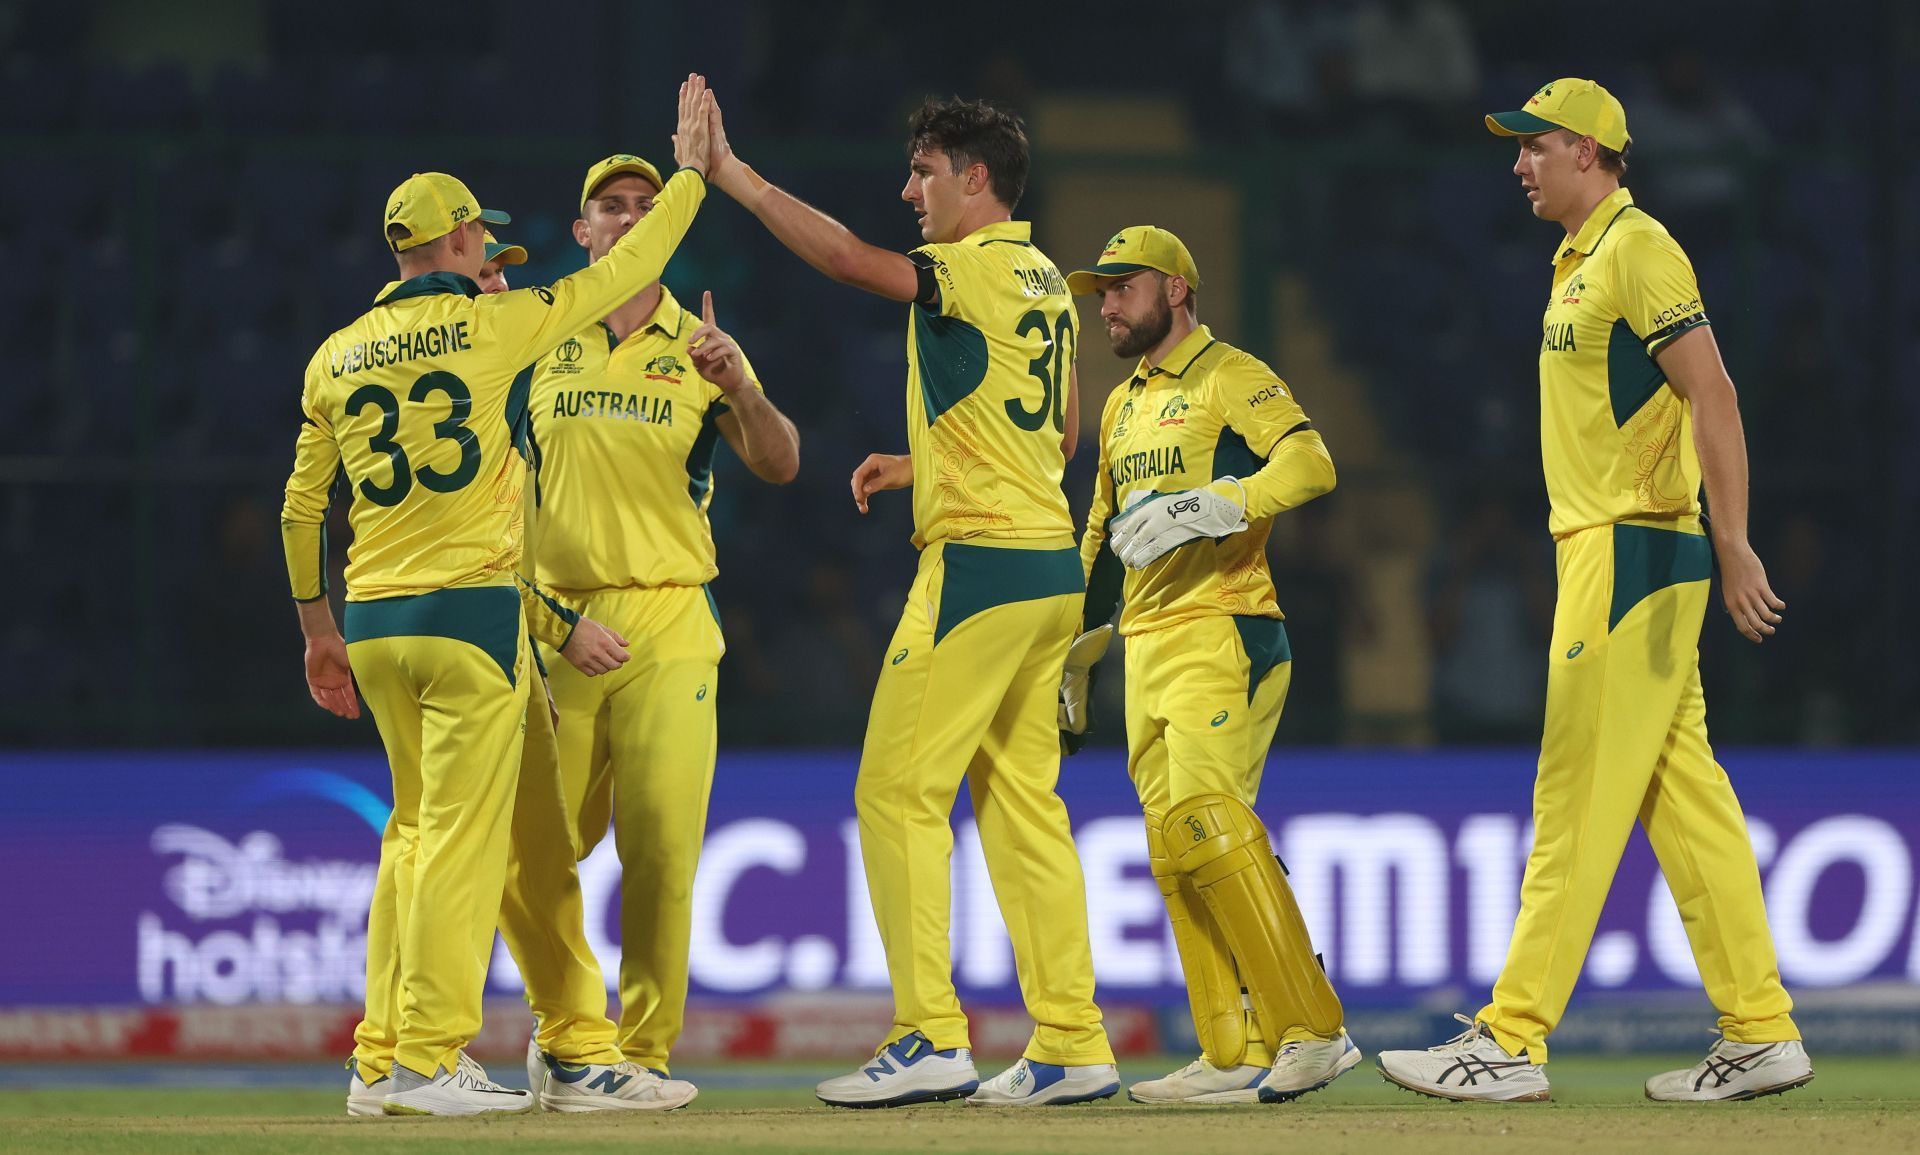 Australian players celebrating after a wicket [Getty Images]